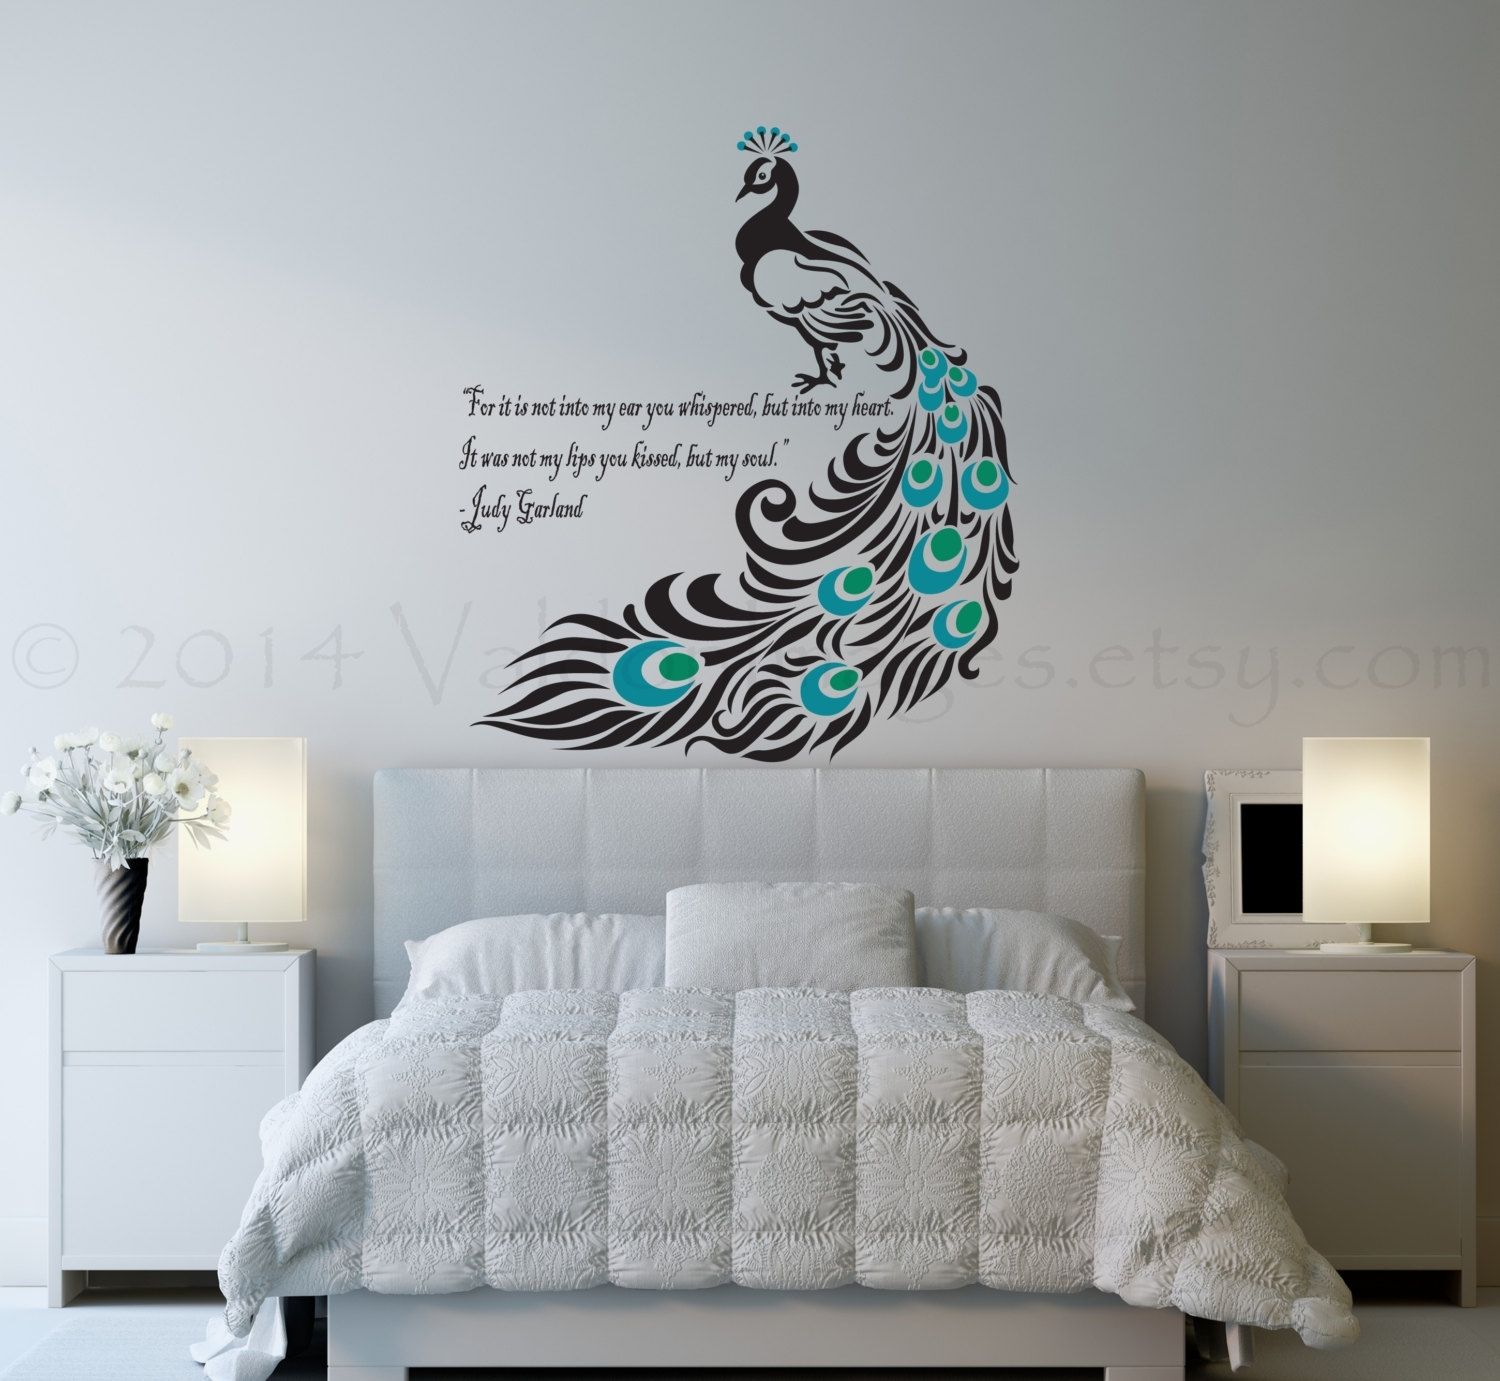 Fancy Wall Art Design Ideas Bedroom Ideal Artistic Walls Nice Pertaining To Wall Art For Bedroom (Photo 2 of 20)